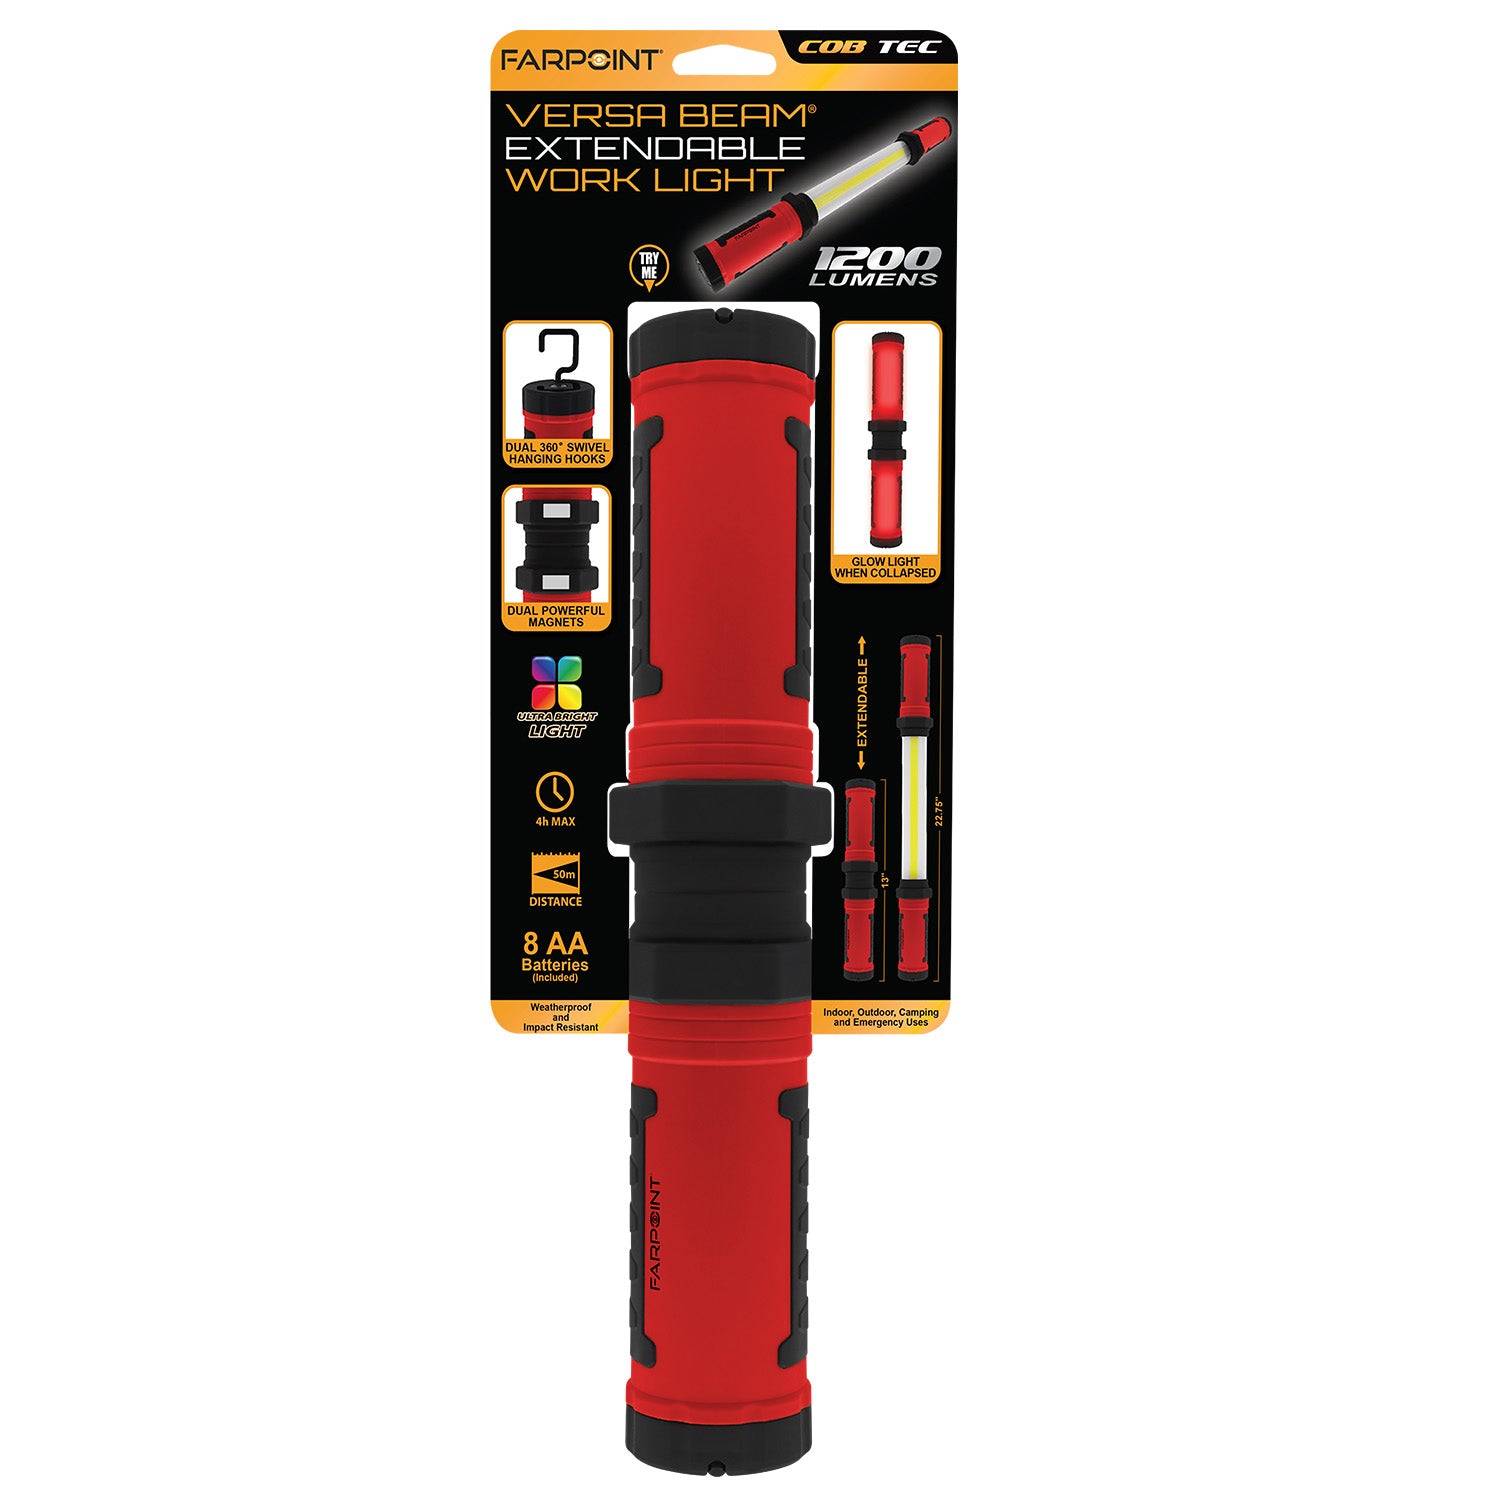 WHILE SUPPLIES LAST - Farpoint® 1200 Lumens Extendable Work Light (4 pc DISPLAY)